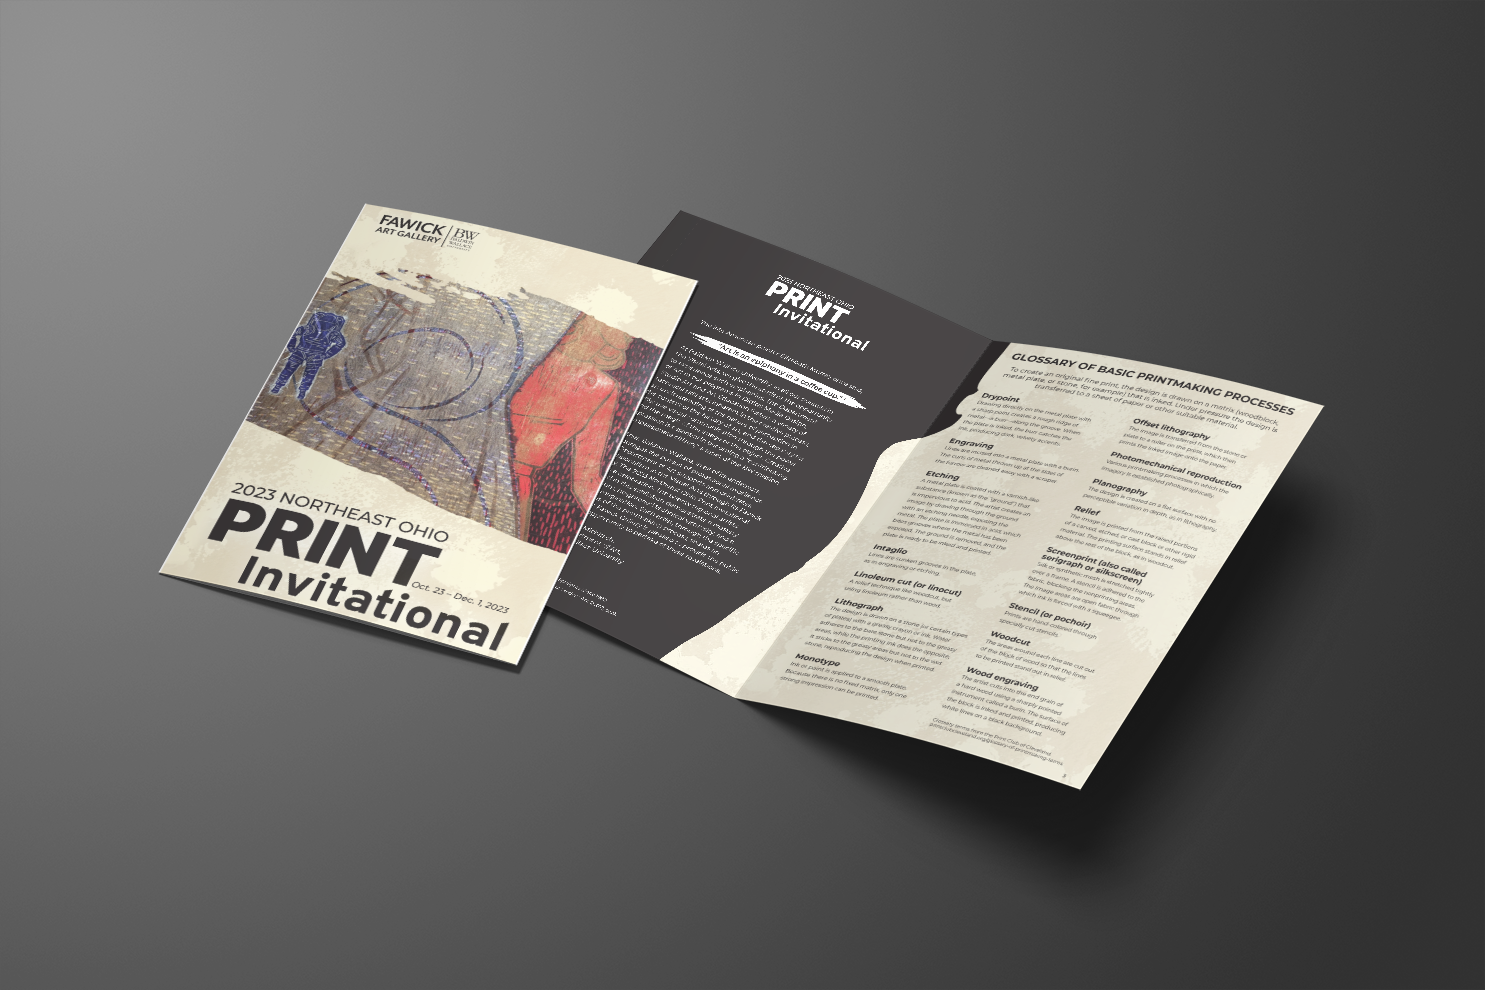 Mockup of the 2023 Northeast Ohio Print invitational booklet showing the cover and a double spread.